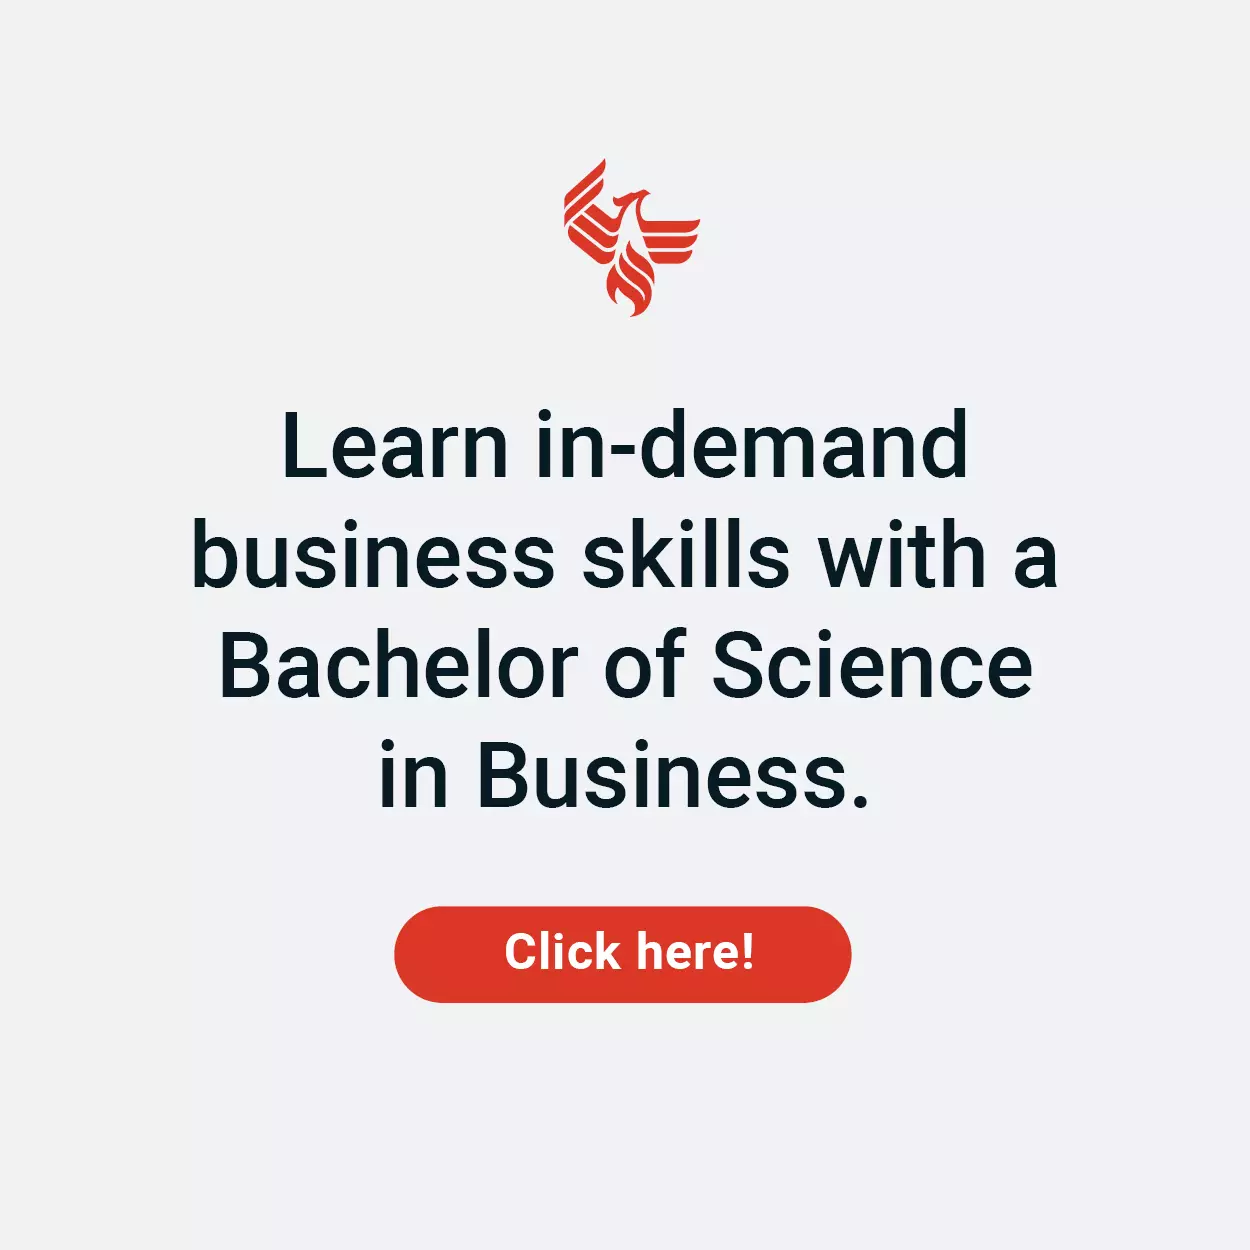 Learn in-demand business skills with a Bachelor of Science in Business